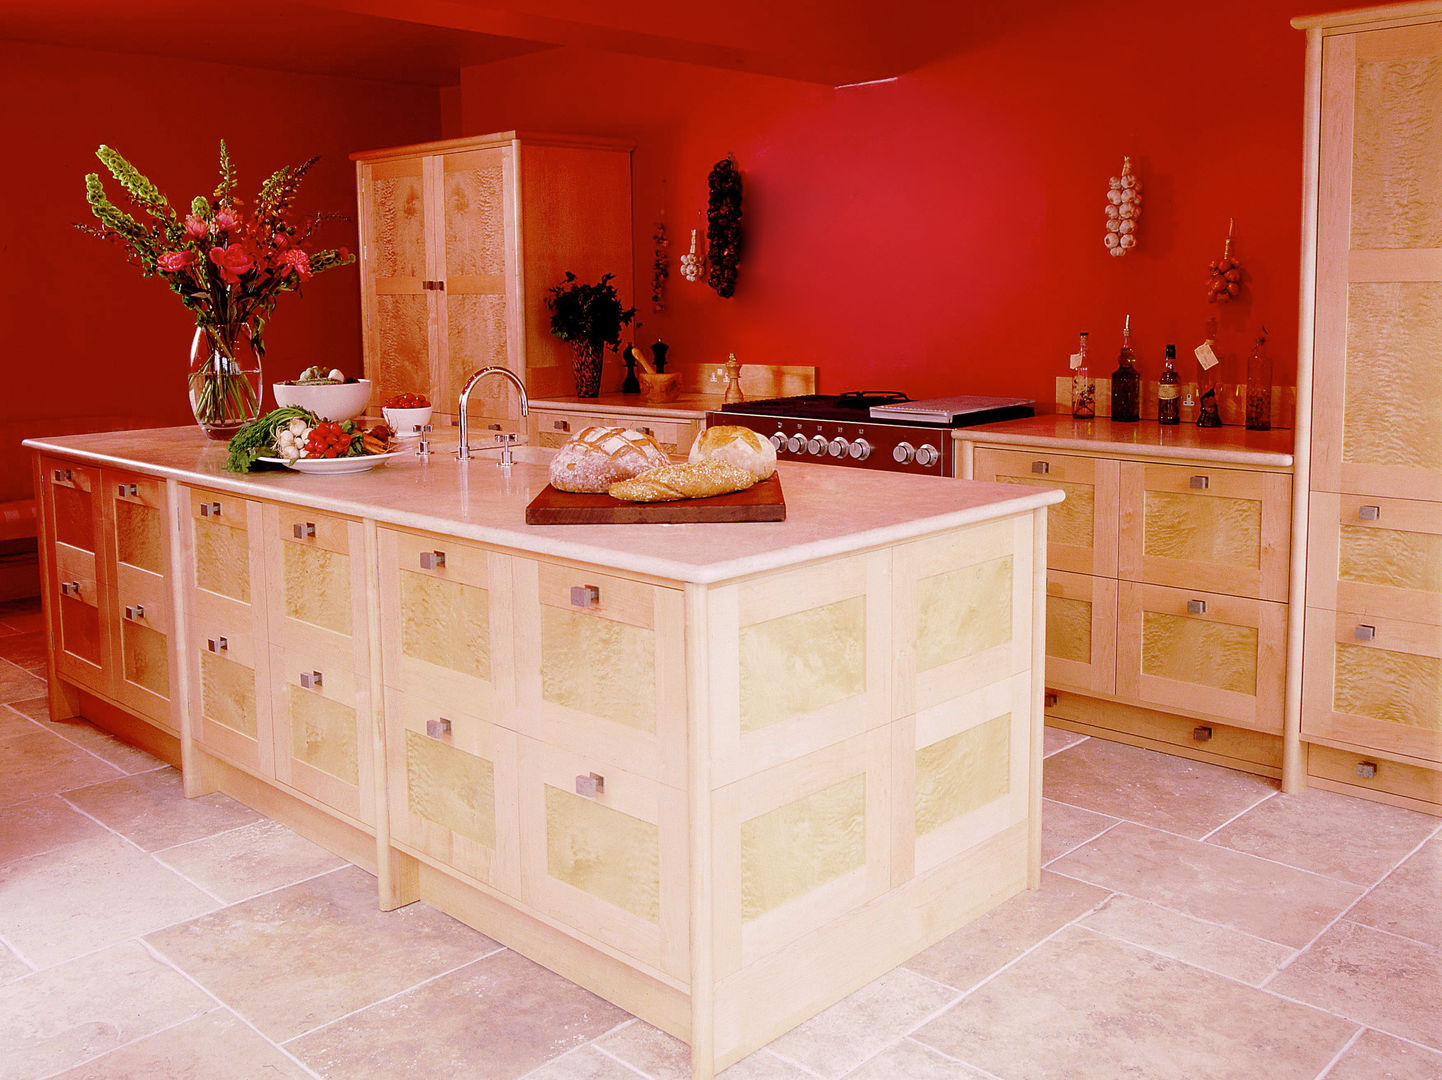 Quilted Maple Kitchen with Red Wall designed and made by Tim Wood Tim Wood Limited Dapur Modern Cabinets & shelves